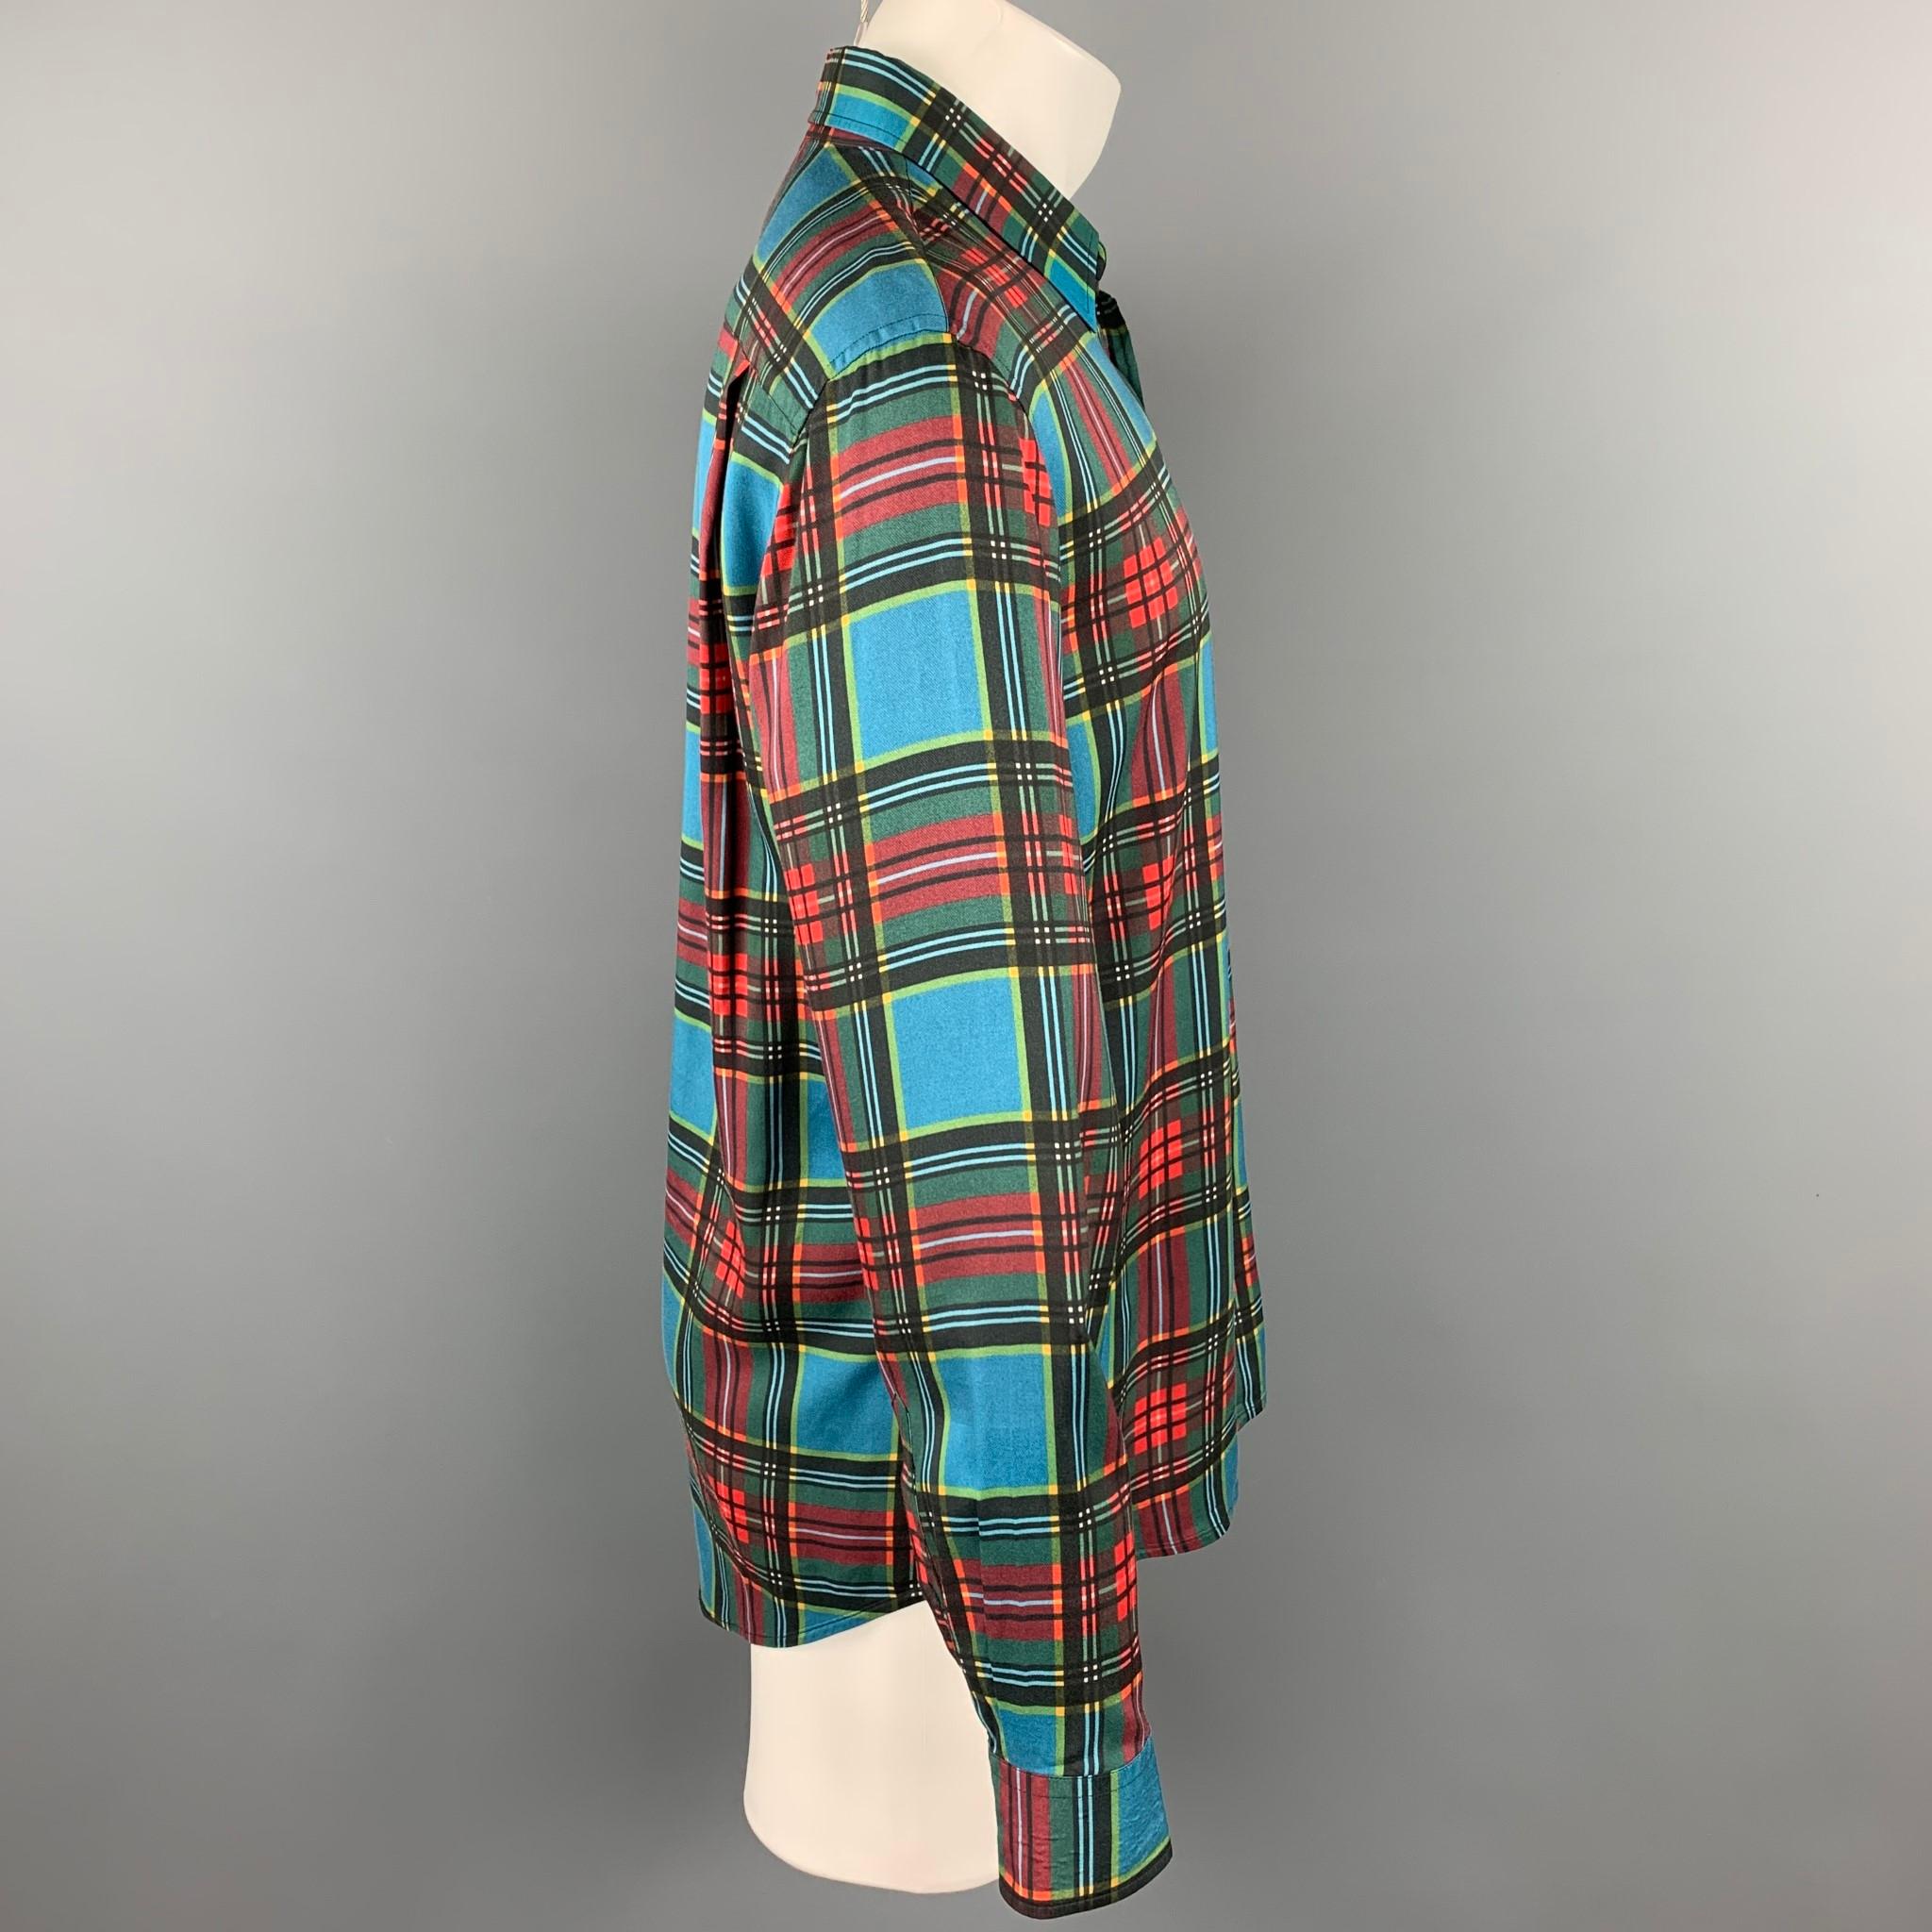 MARC JACOBS long sleeve shirt comes in a multi-color plaid viscose featuring a classic fit, button up style, front pocket, and a spread collar. Made in Italy.

Excellent Pre-Owned Condition.
Marked: IT 48

Measurements:

Shoulder: 19 in.
Chest: 42